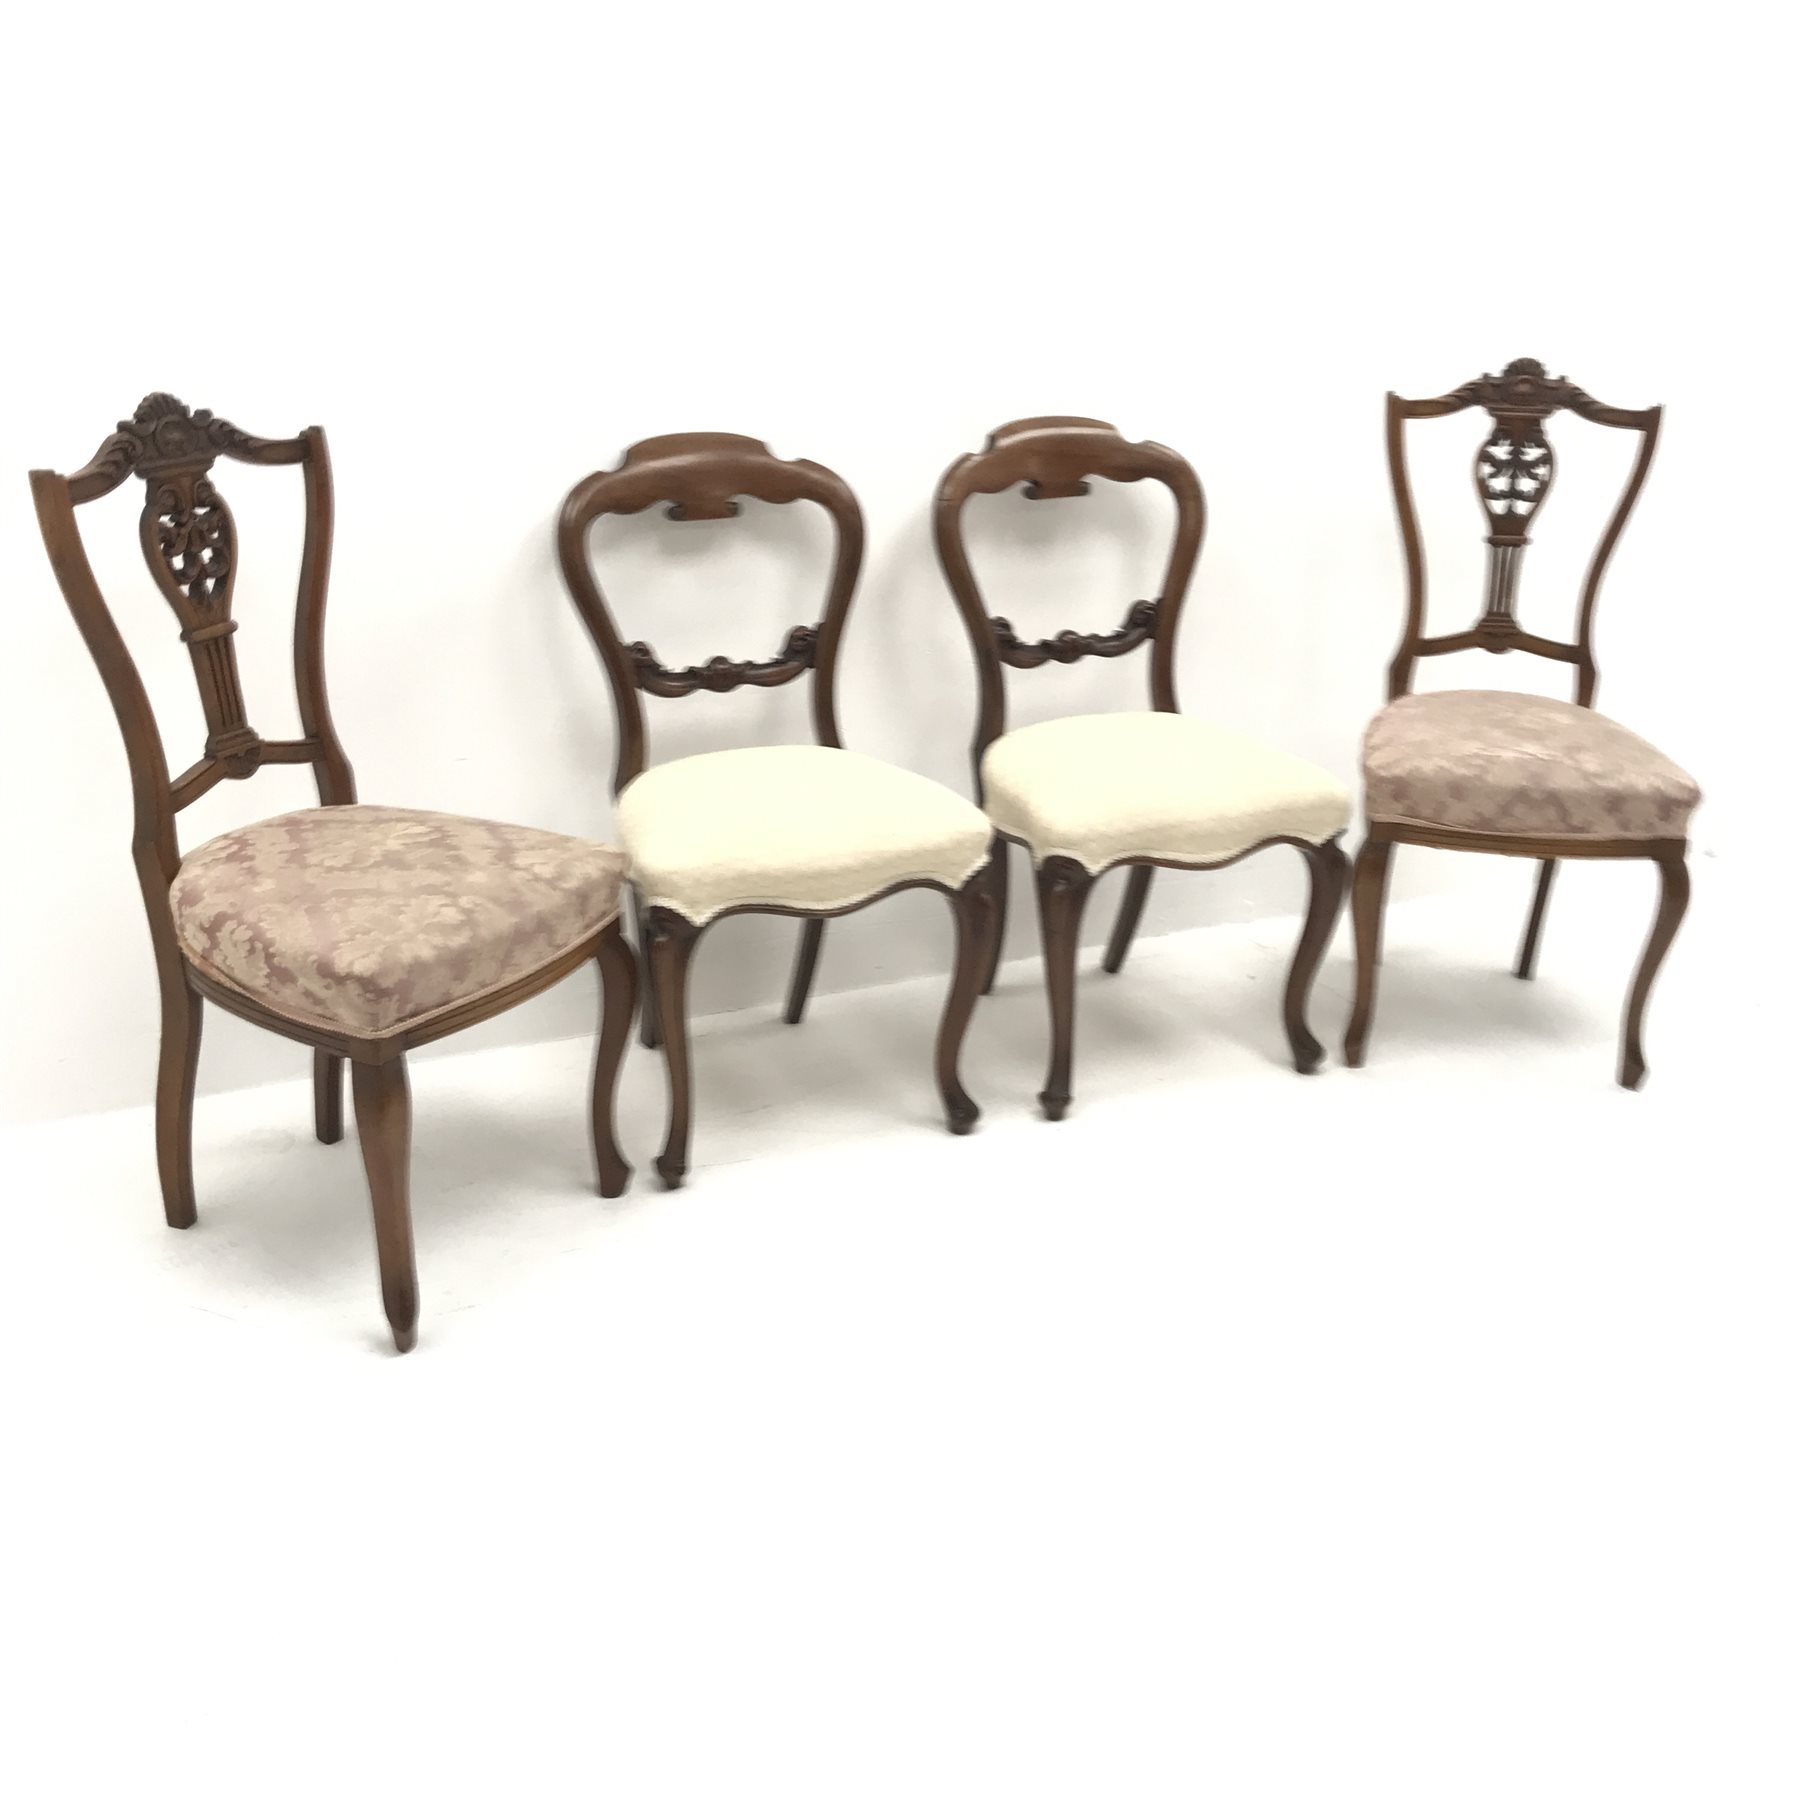 Two Victorian mahogany chairs with upholstered seats (W49cm) and two Edwardian mahogany salon chair